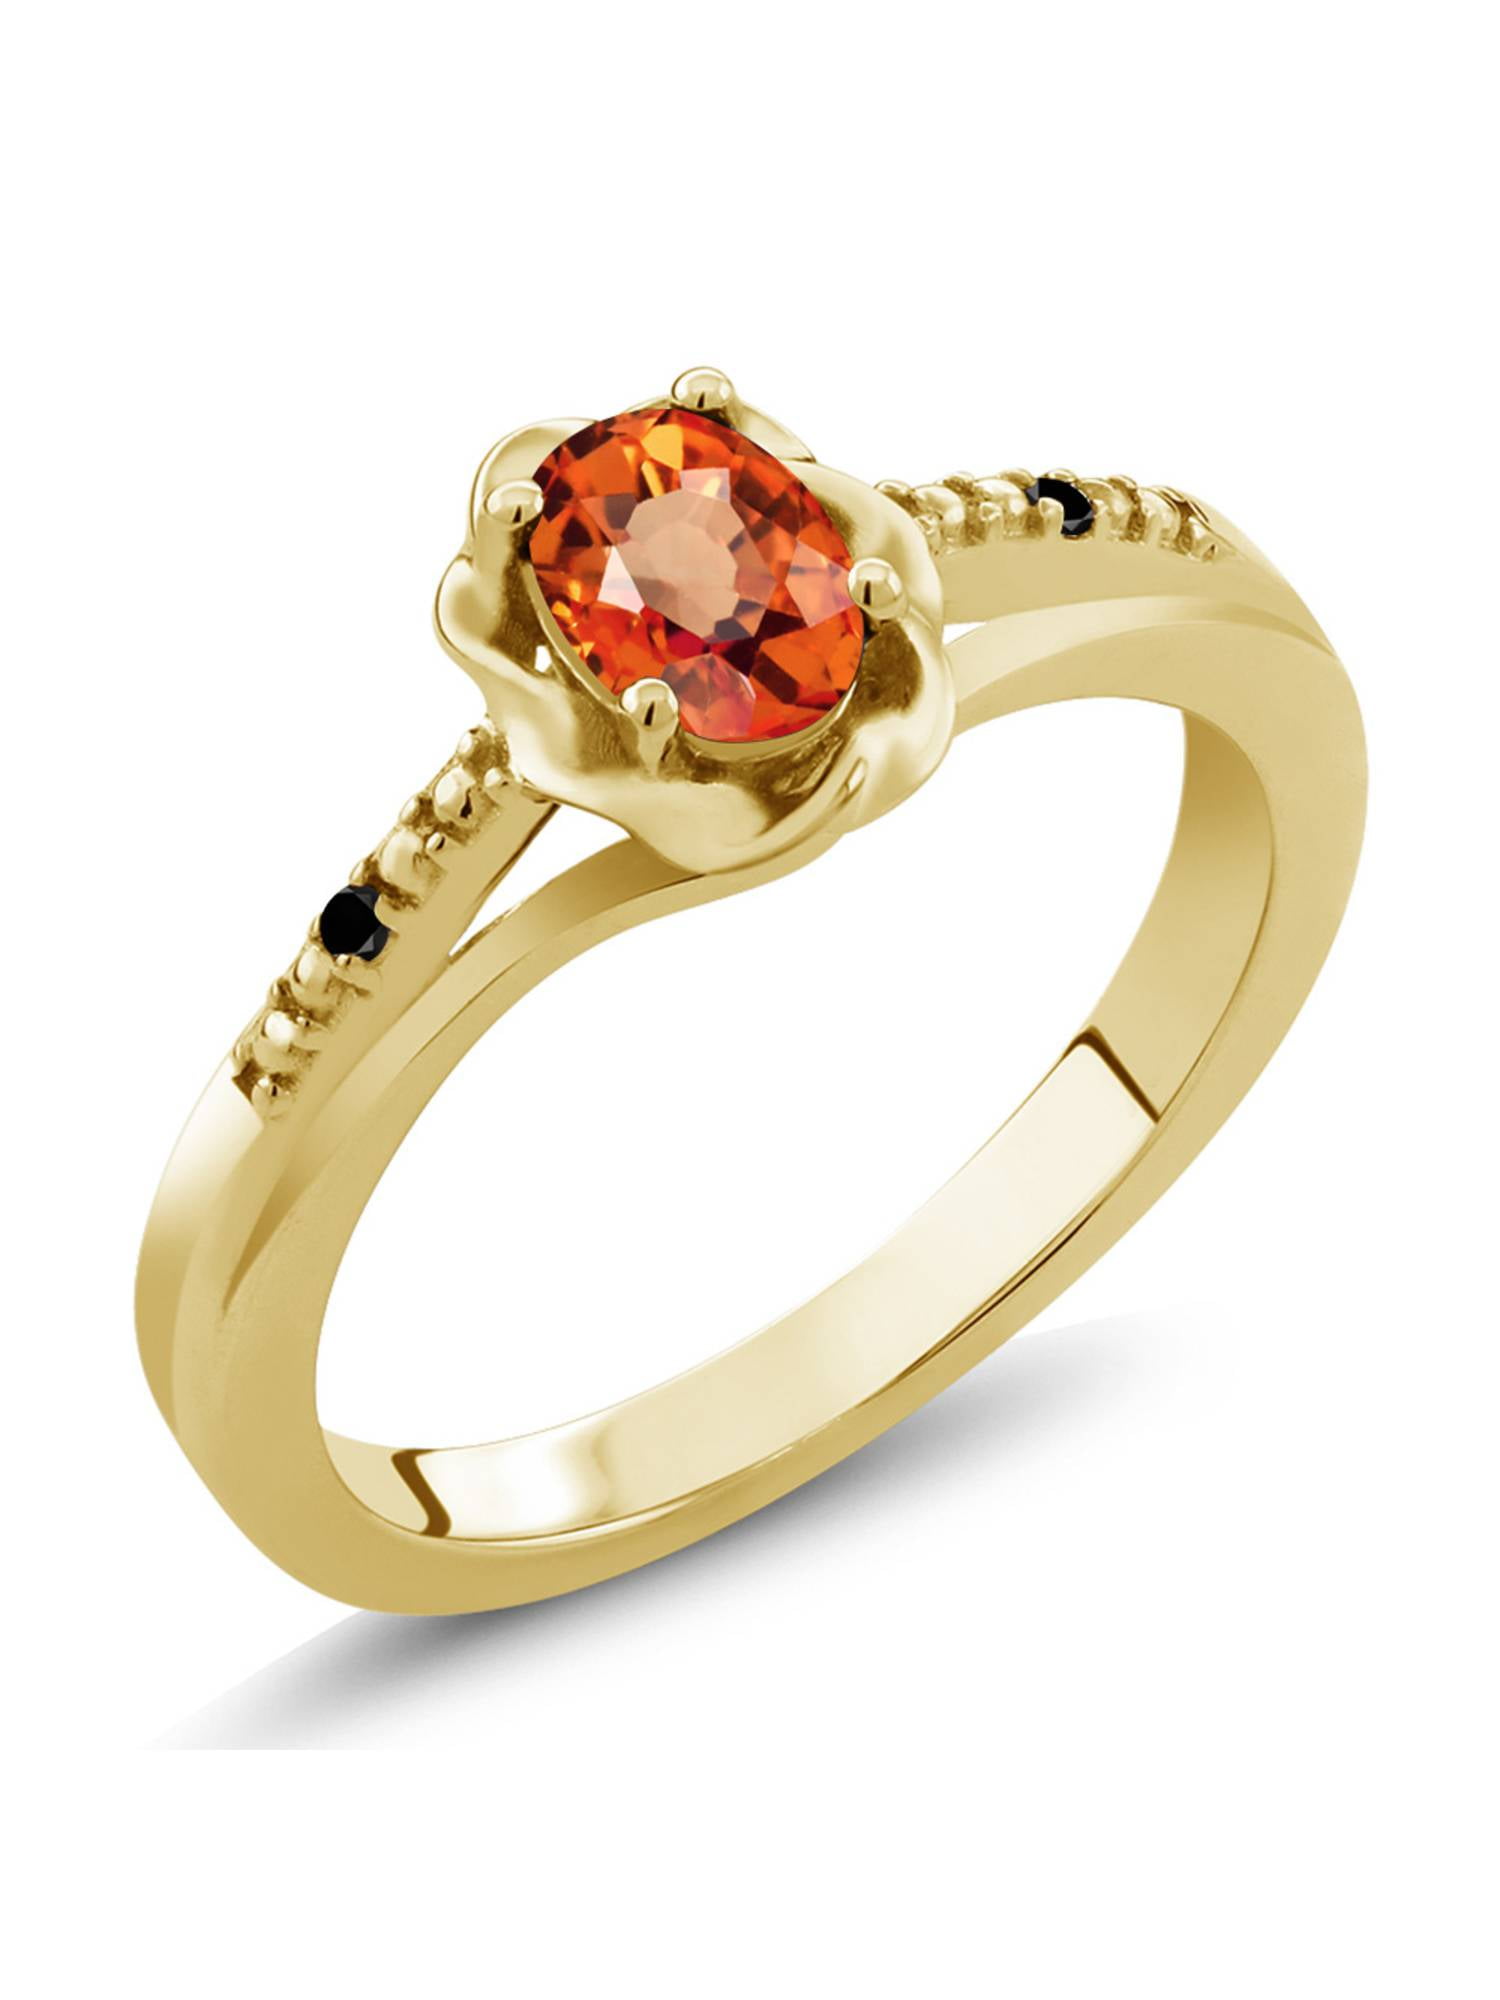 Gem Stone King 0.56 Ct Oval Yellow Sapphire White Diamond 18K Rose Gold Plated Silver Ring